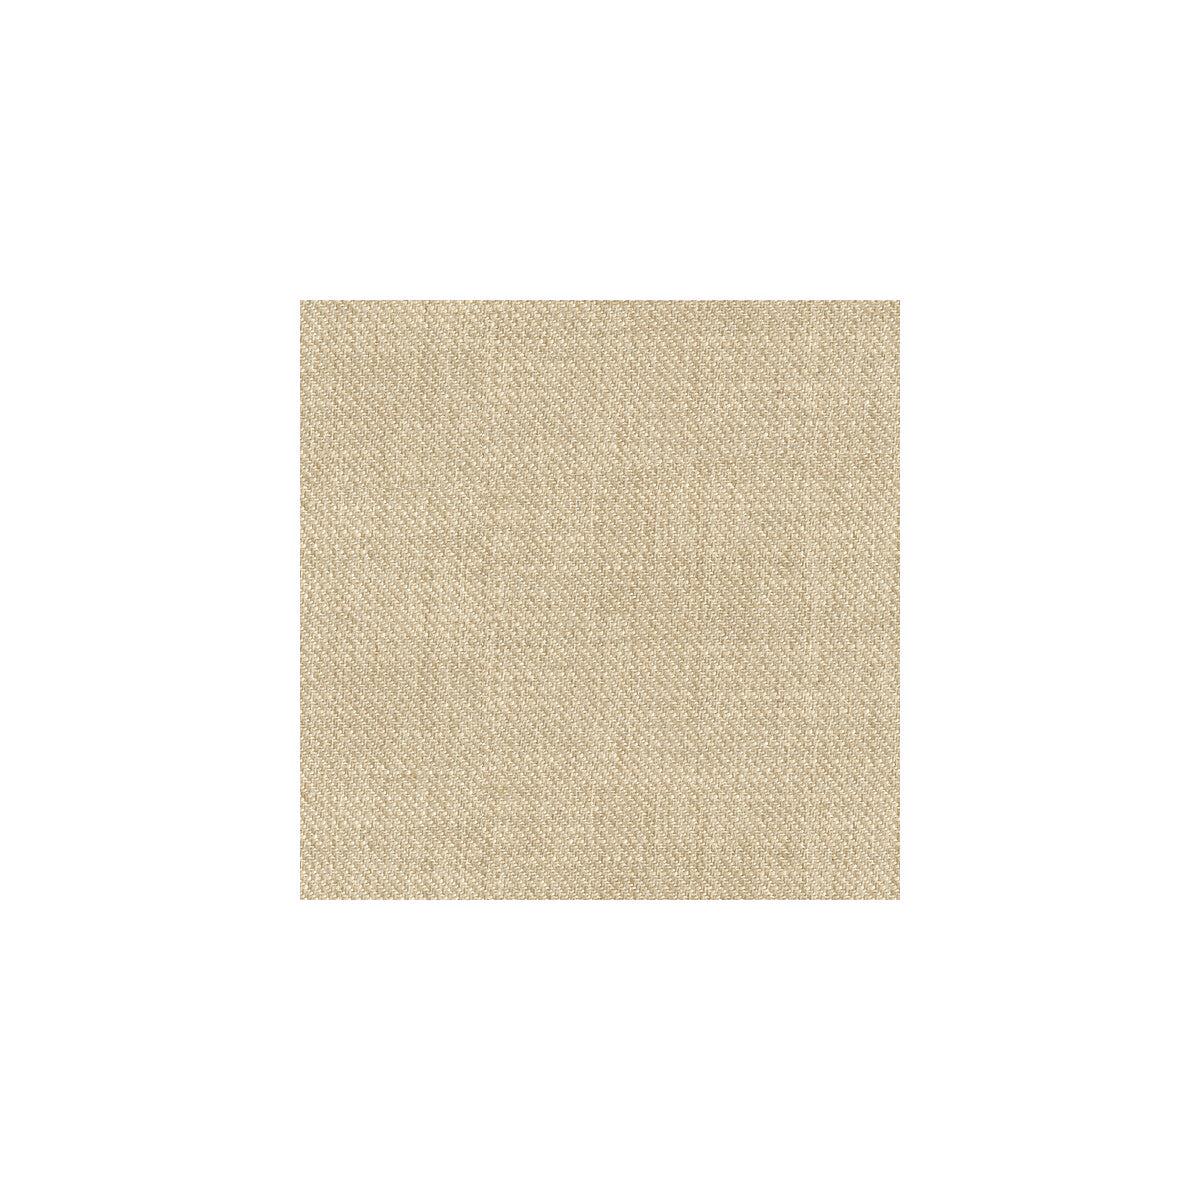 Kravet Smart fabric in 33139-16 color - pattern 33139.16.0 - by Kravet Smart in the Thom Filicia collection